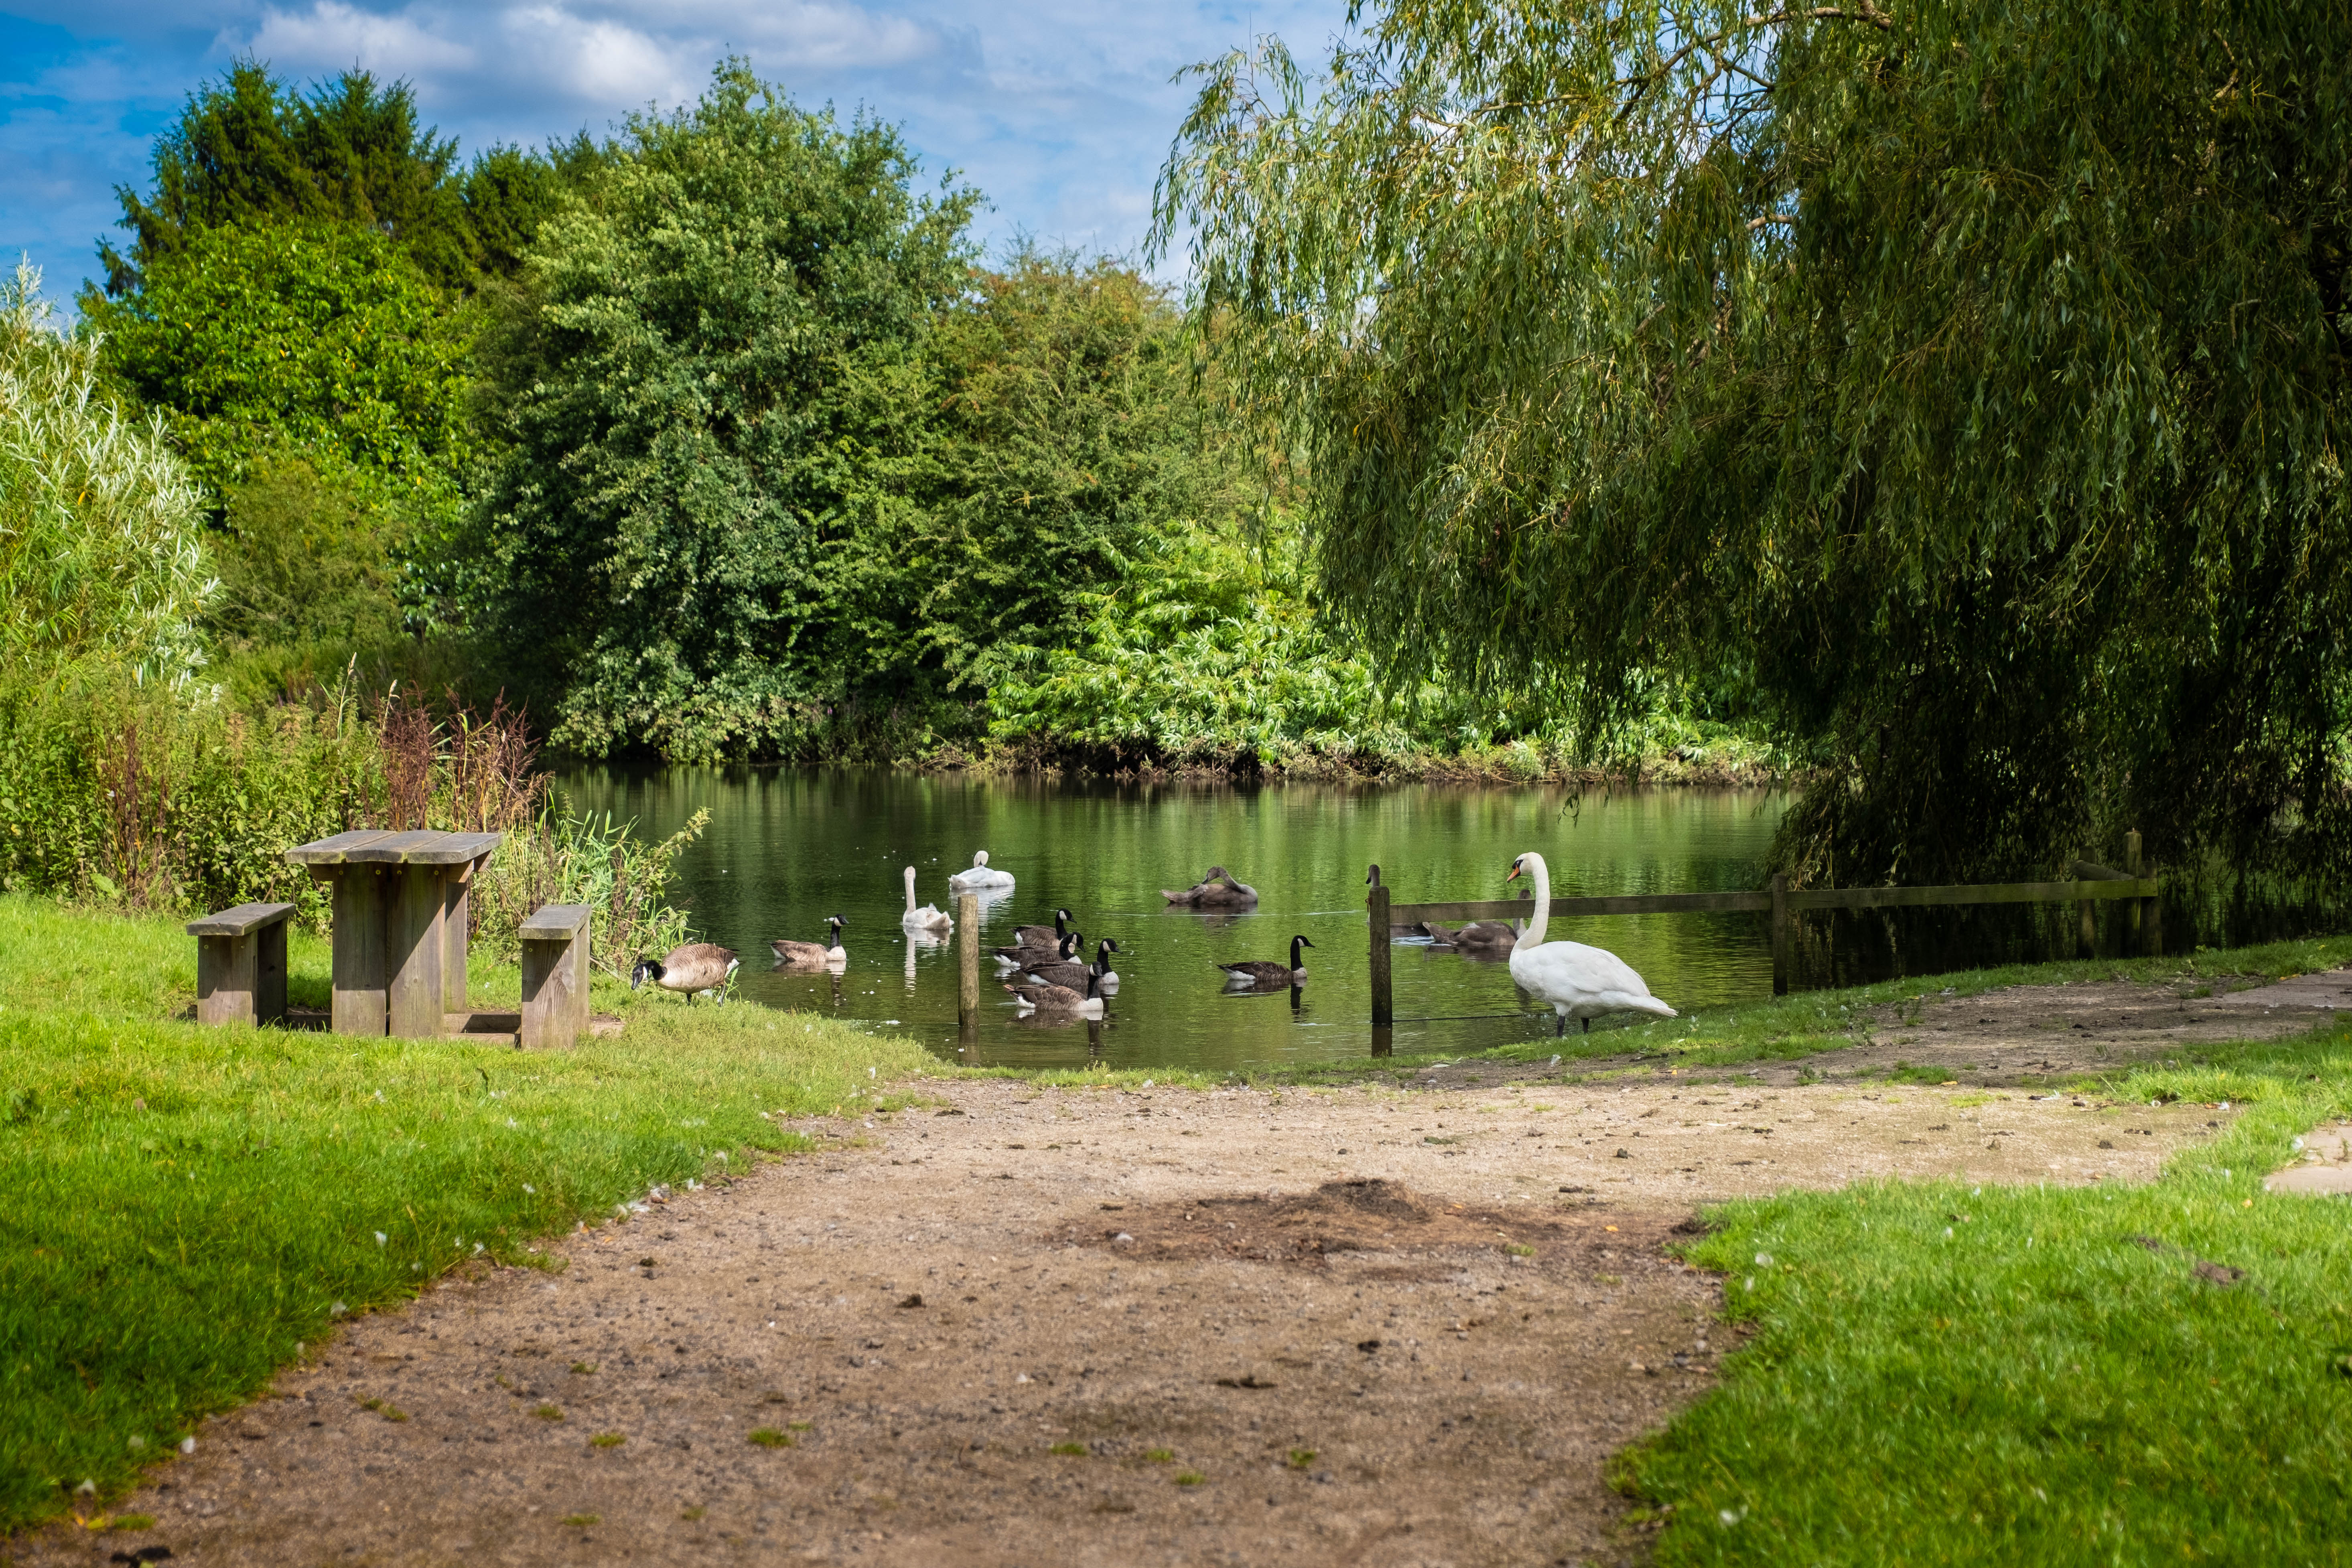 A path leading to a lake at Kingsbury Water Park. Ducks, Swans and geese appear on the water.